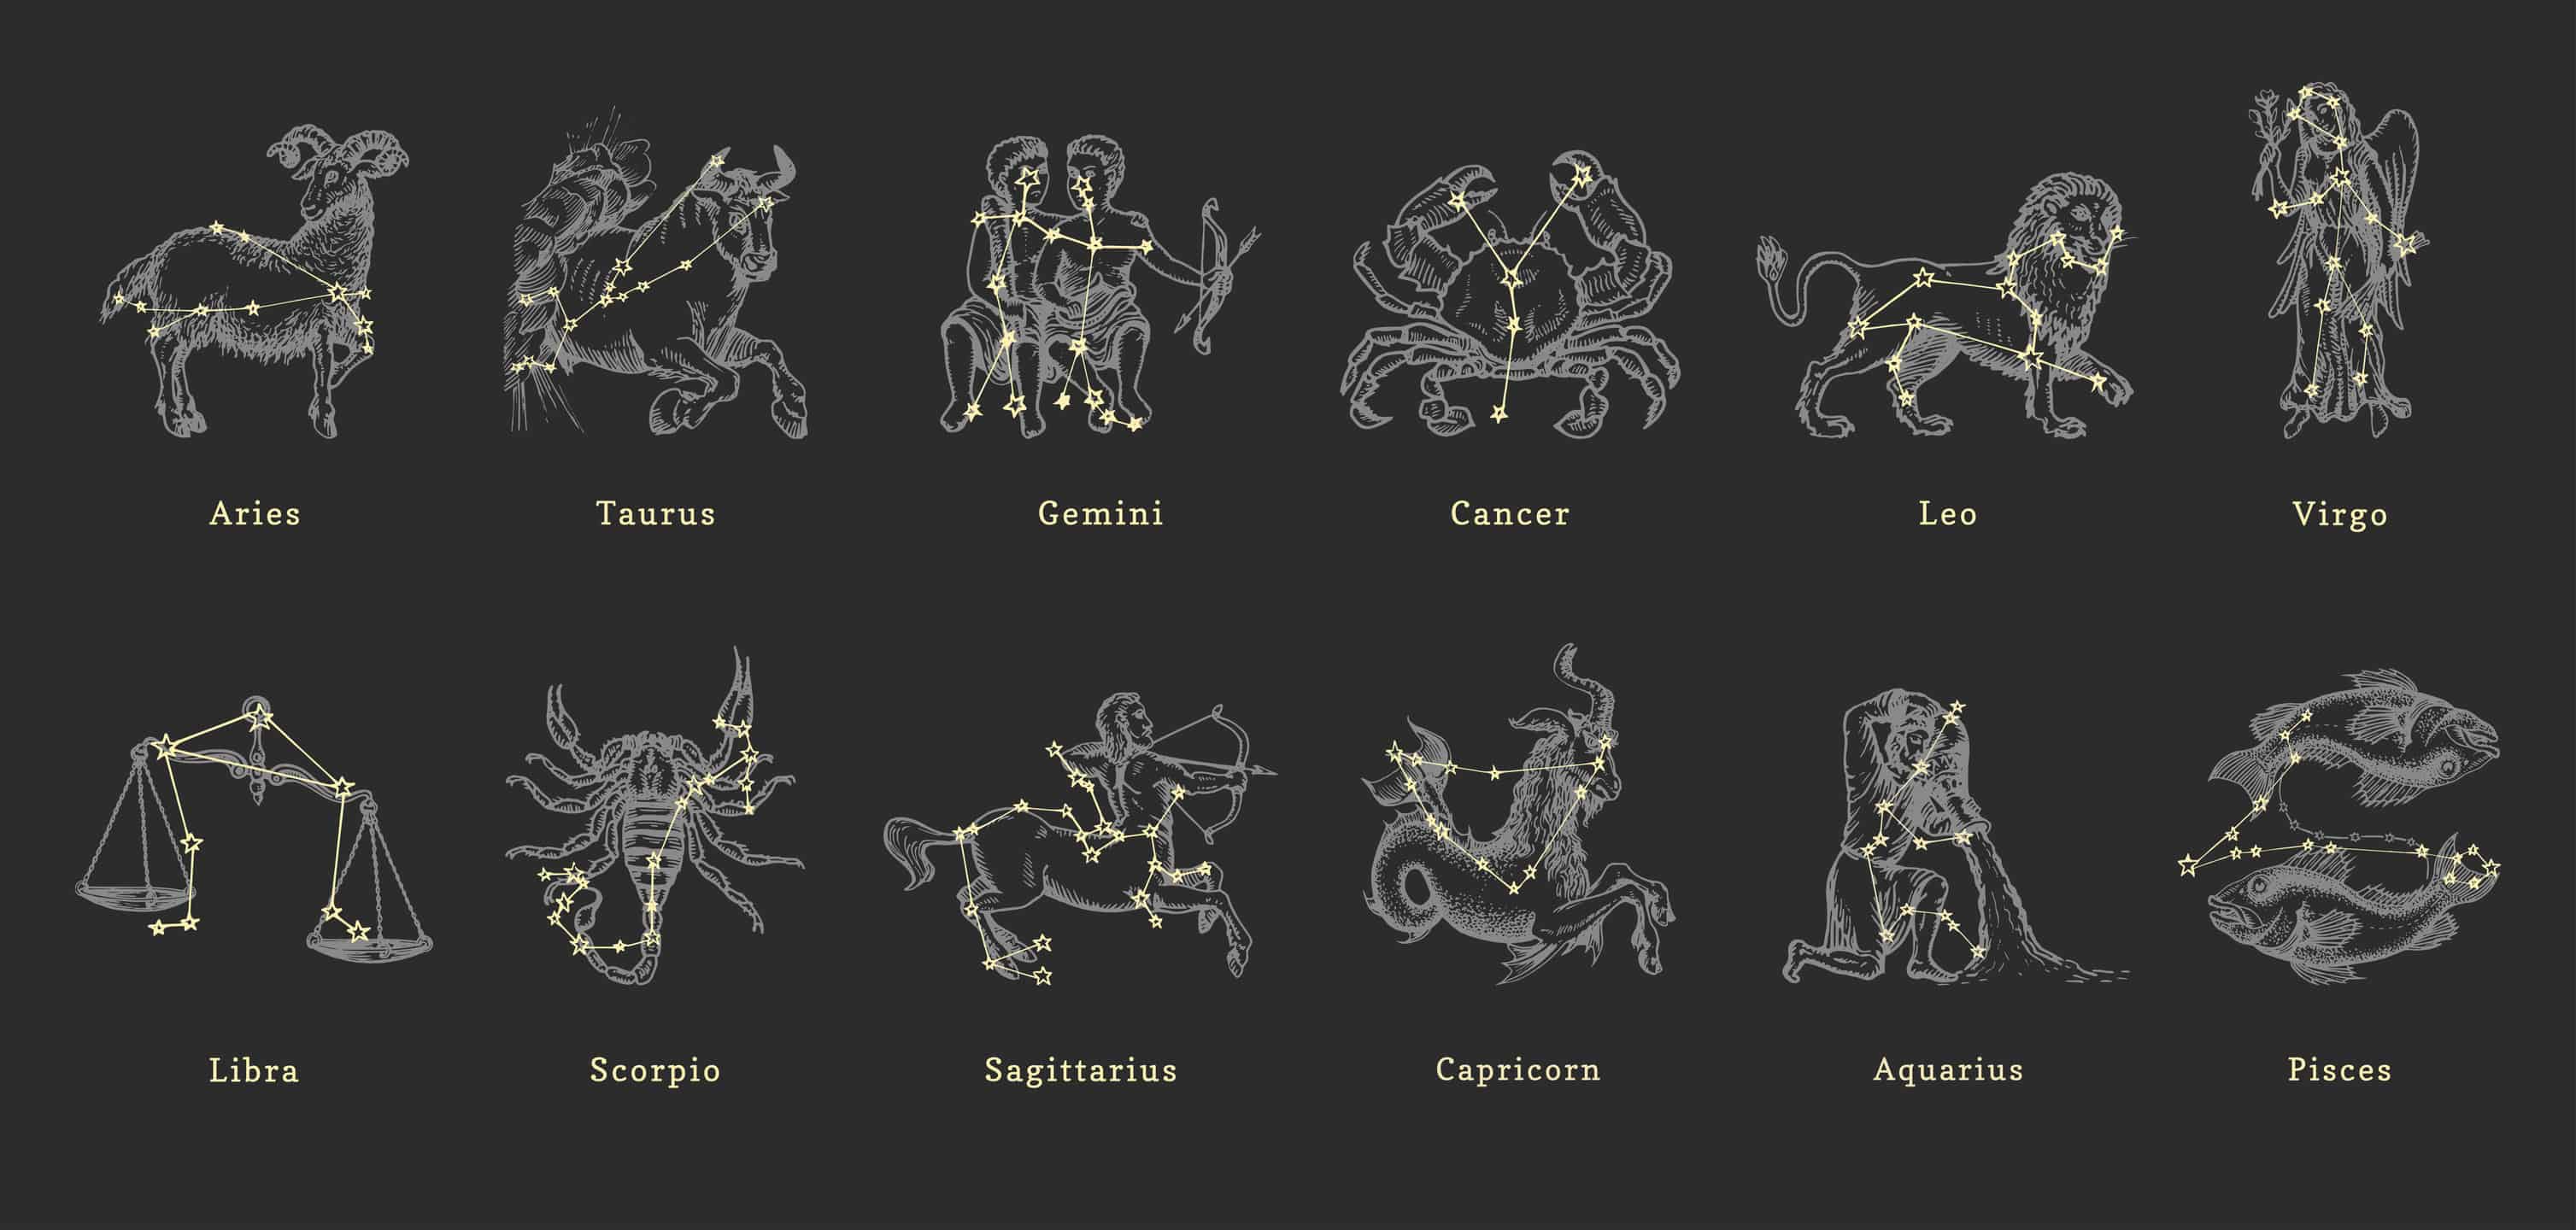 Meet the Capricorn Spirit Animals and What They Mean